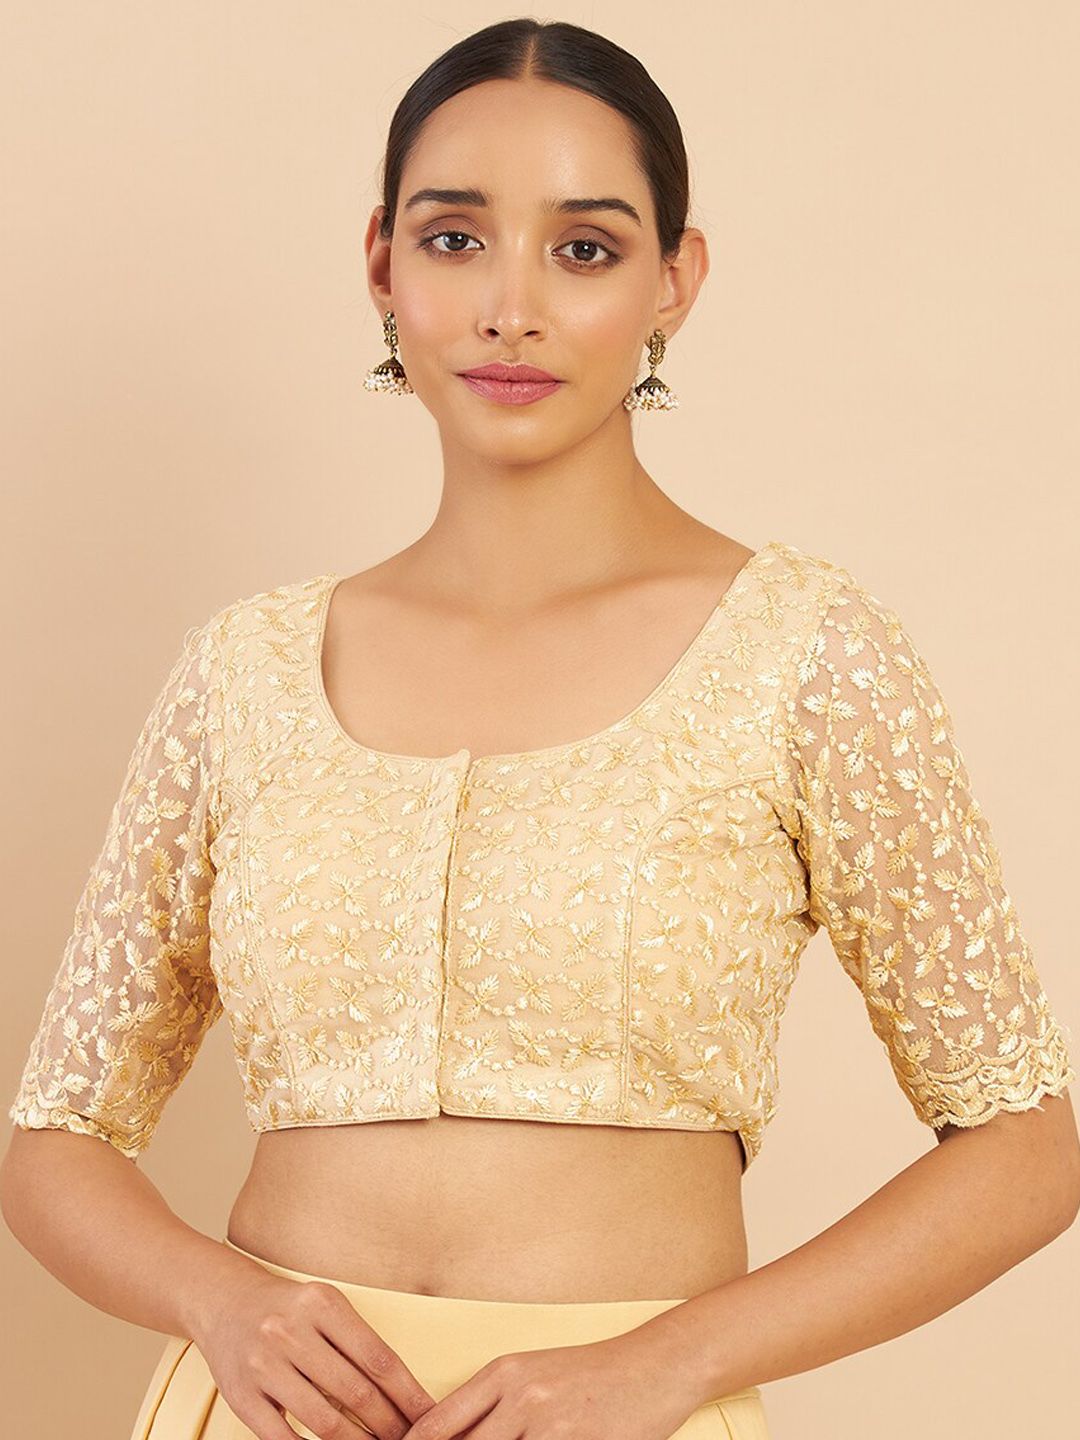 Soch Women Gold-Coloured Embroidered Saree Blouse Price in India